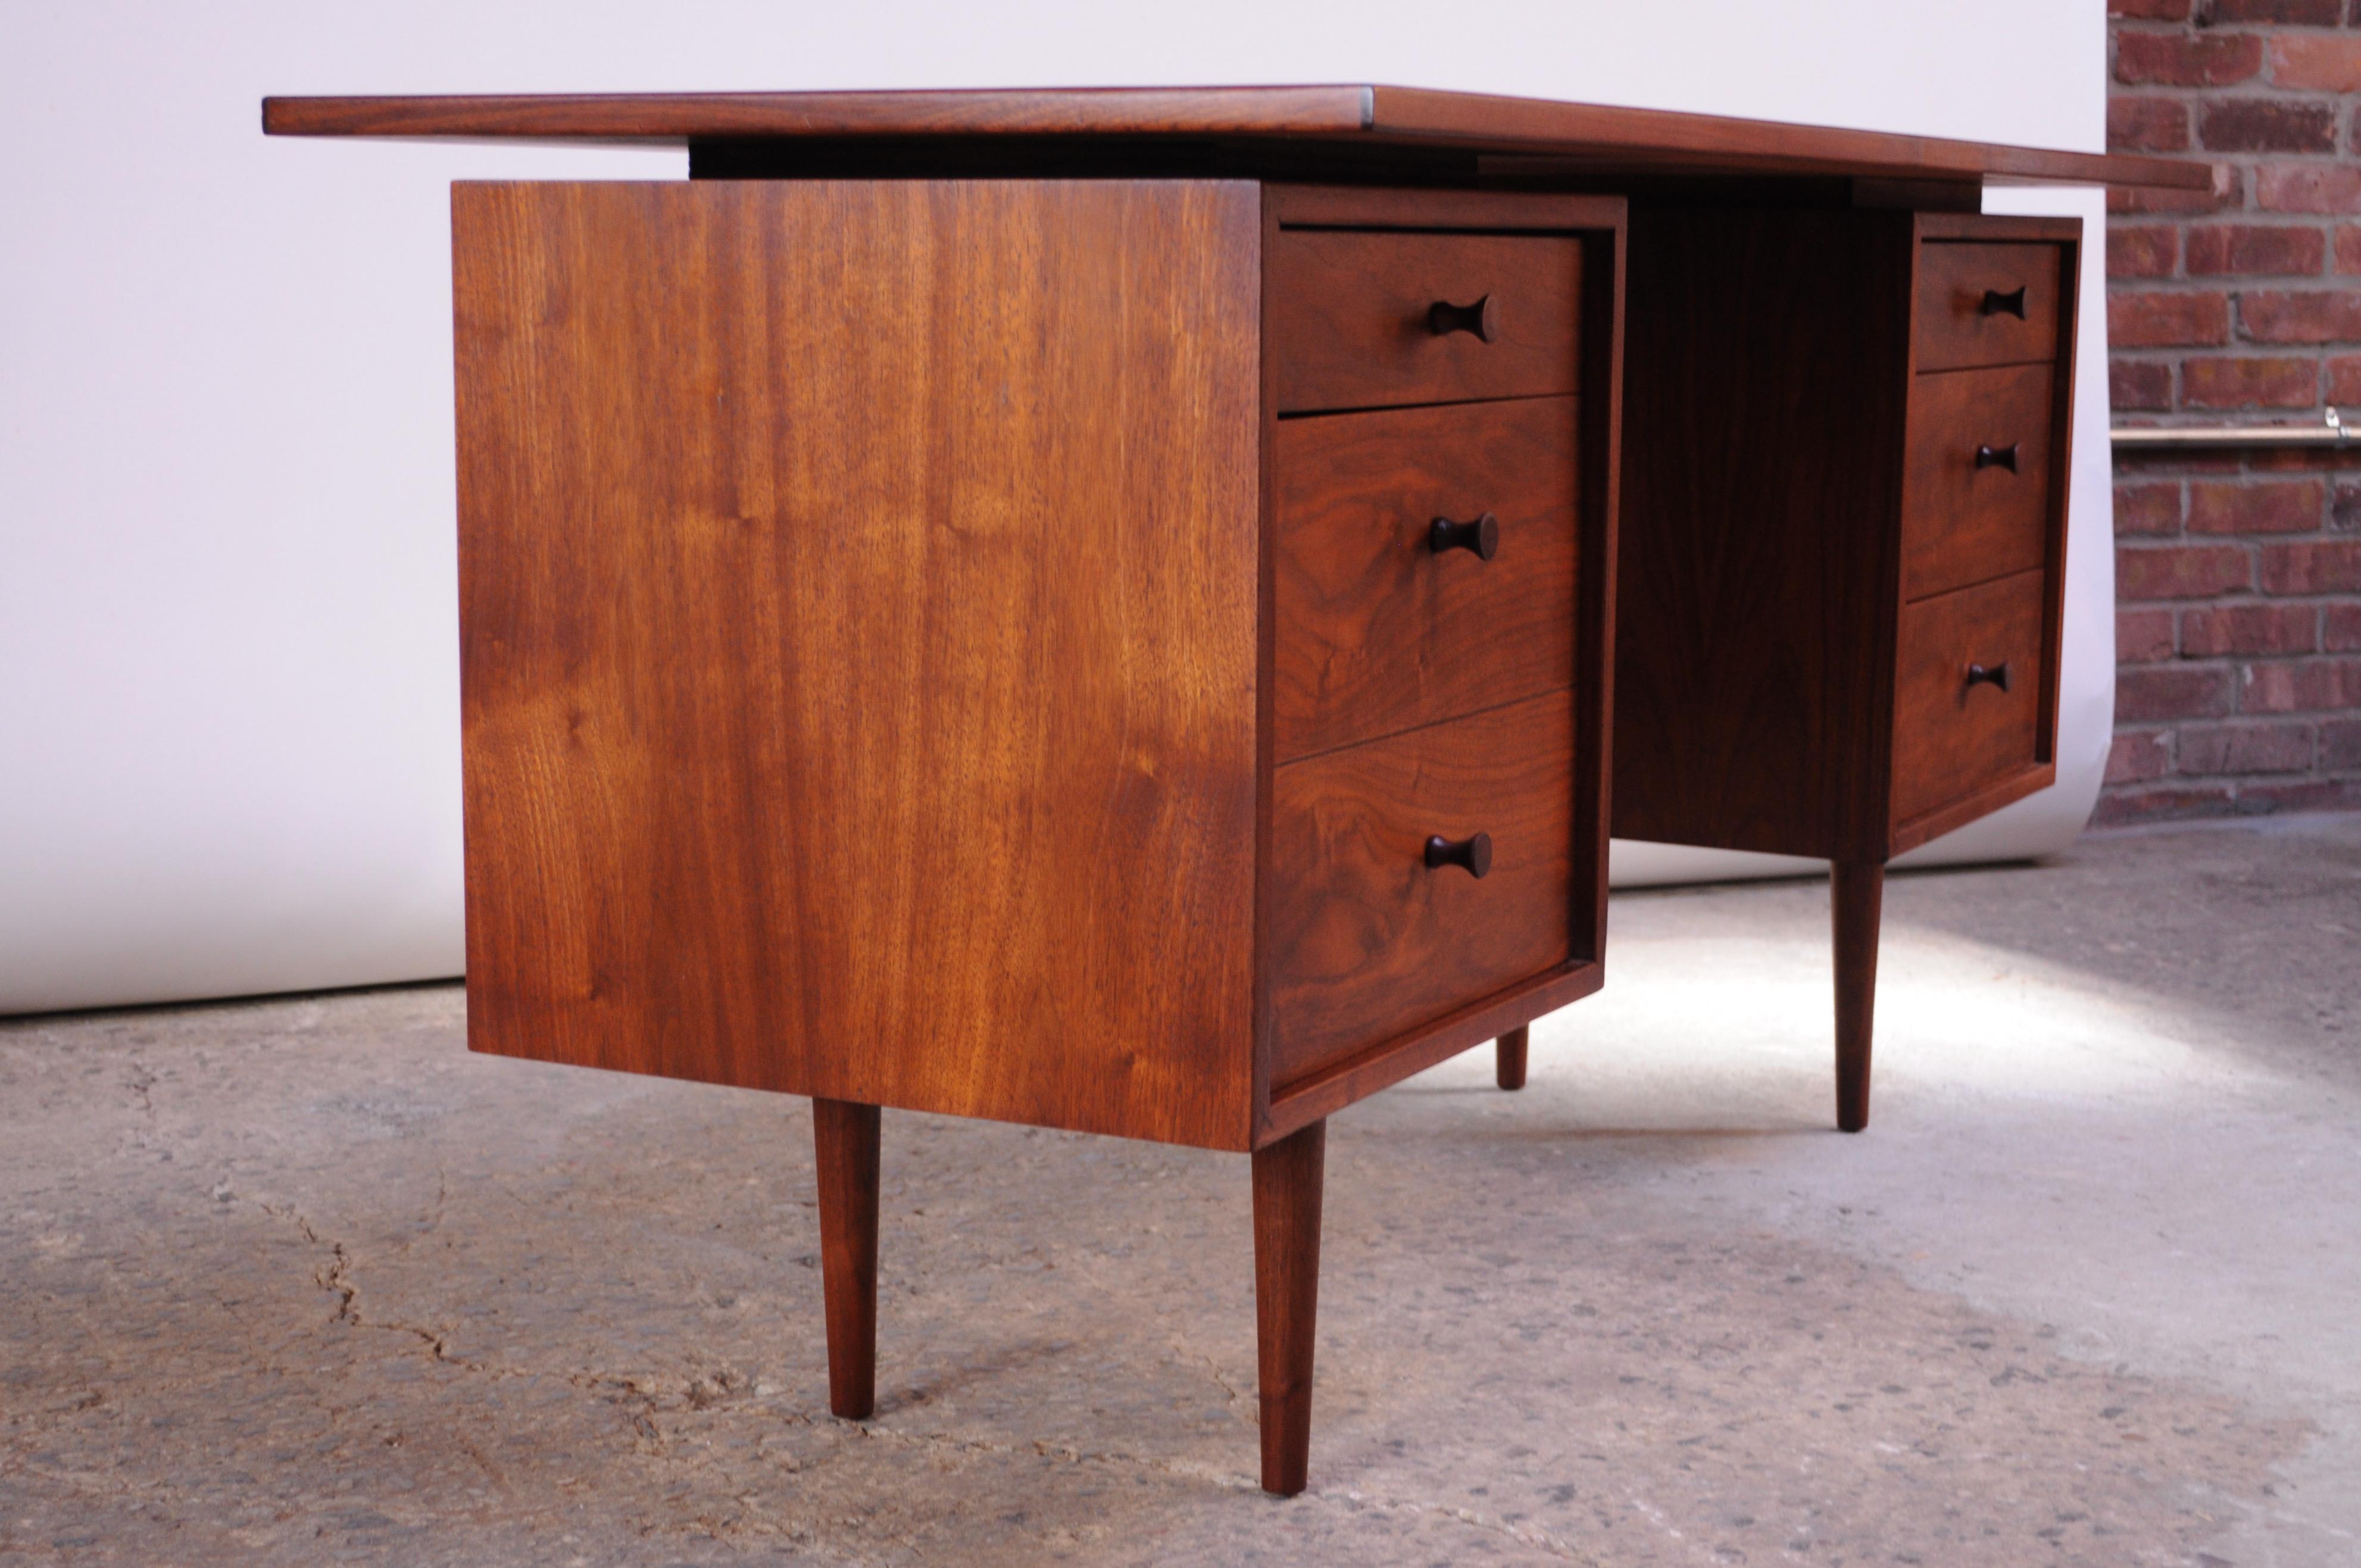 Walnut desk by renowned painter and sculptor, Richard Artschwager, who in 1953 designed a small collection of furniture in New York City. These pieces are scarce, as production and scope of design were exceedingly limited. 
This desk is composed of